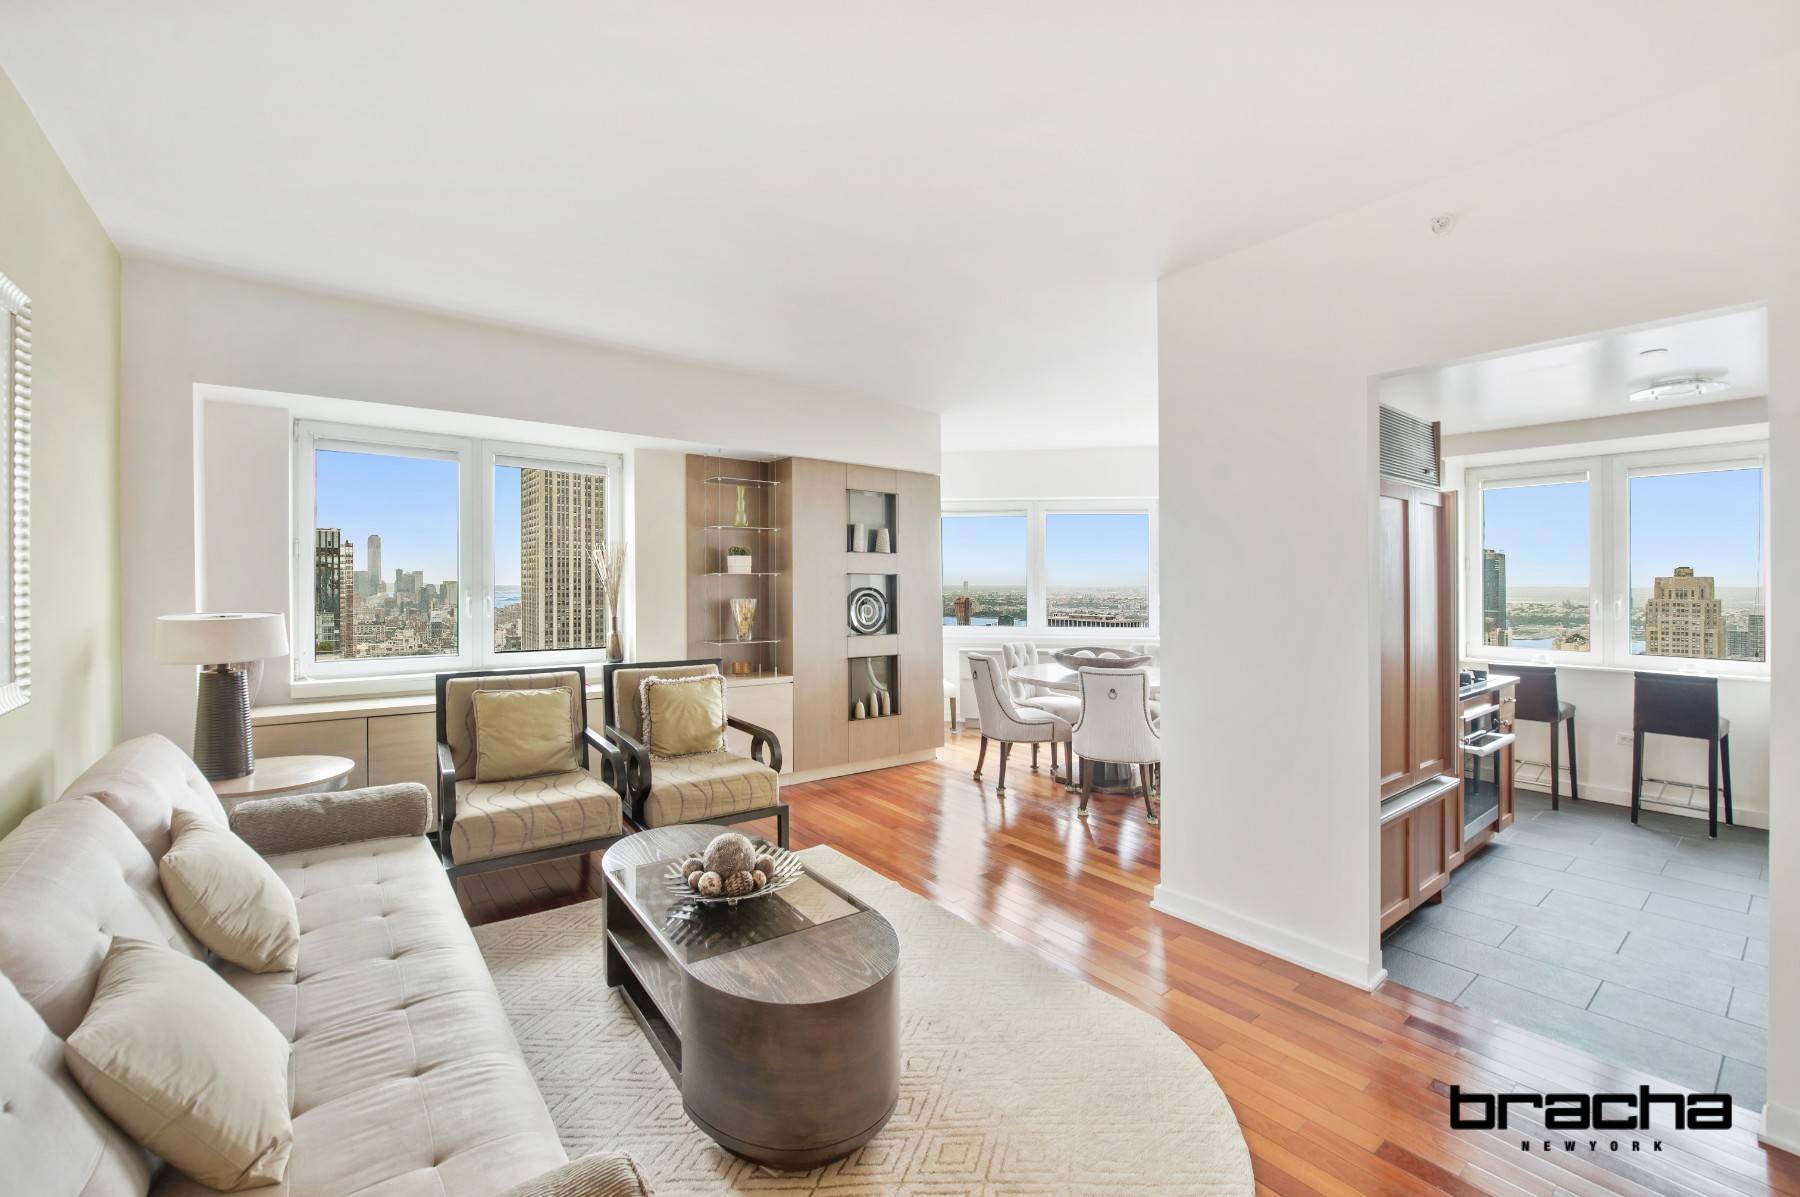 An Urban Oasis with Breathtaking Views Two Bedroom Two Bathroom Corner Unit on High Floor.